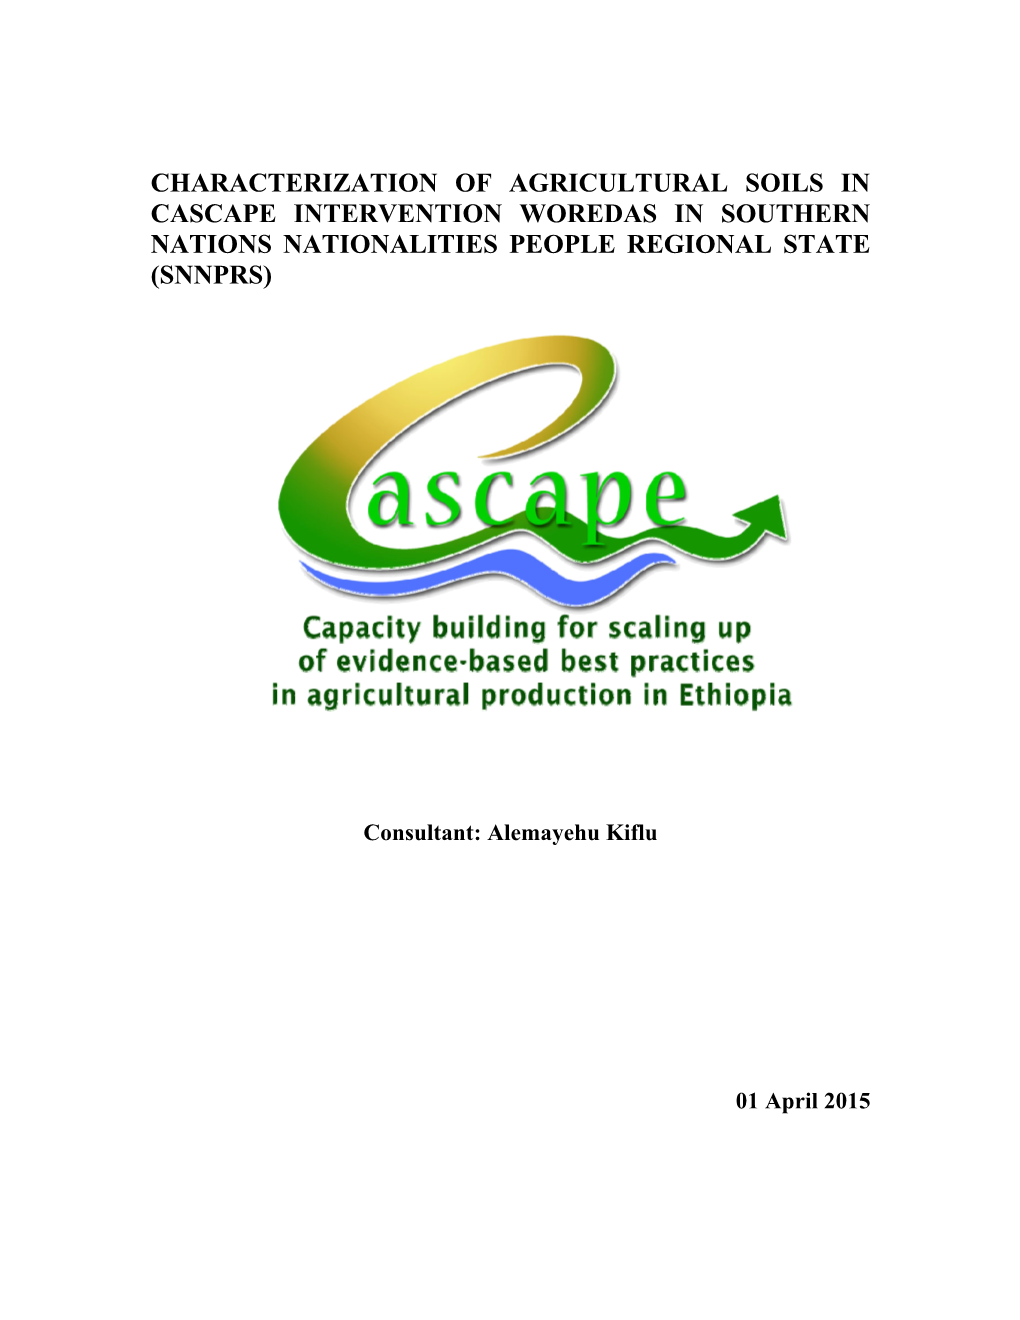 Characterization of Agricultural Soils in Cascape Intervention Woredas in Southern Nations Nationalities People Regional State (Snnprs)